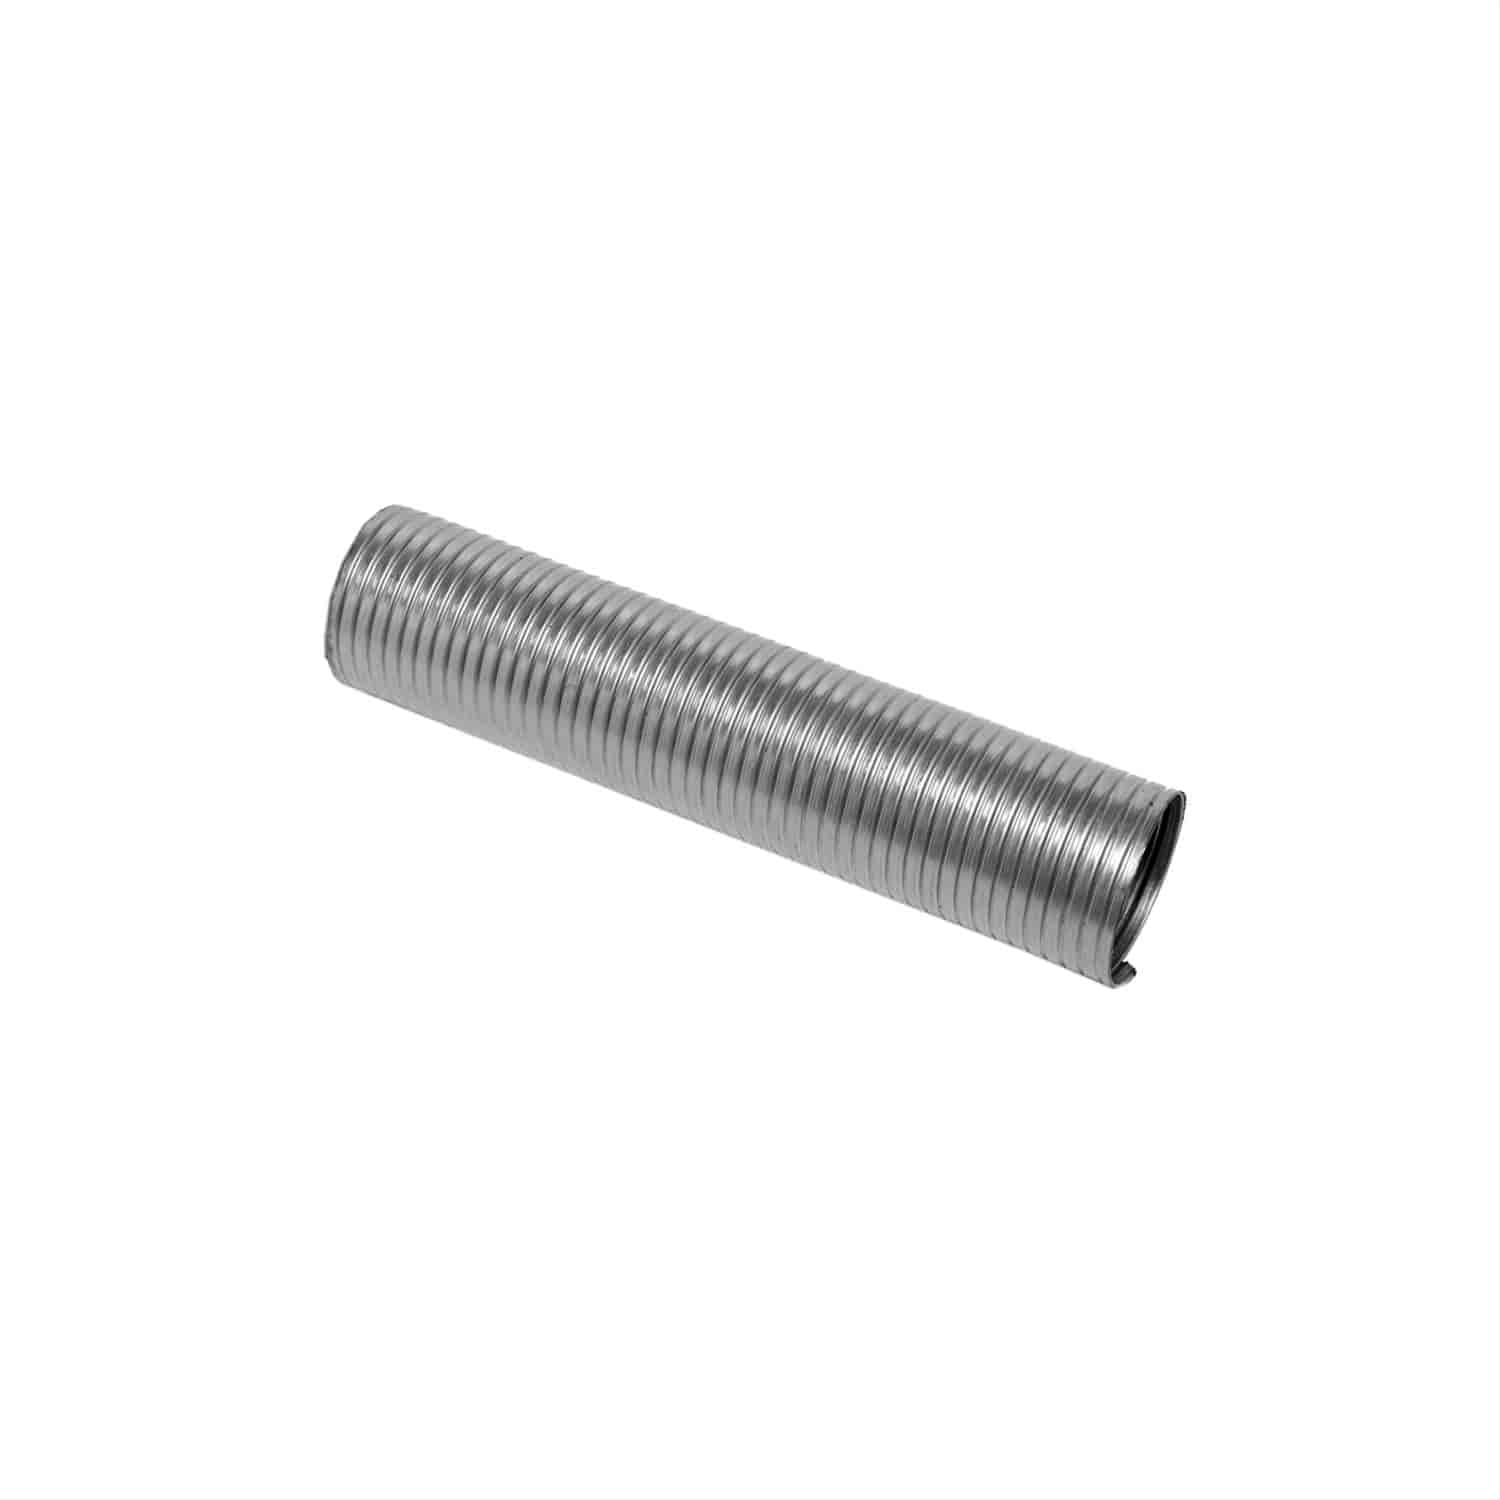 Exhaust FLEX CONNECTOR-STAINLESS